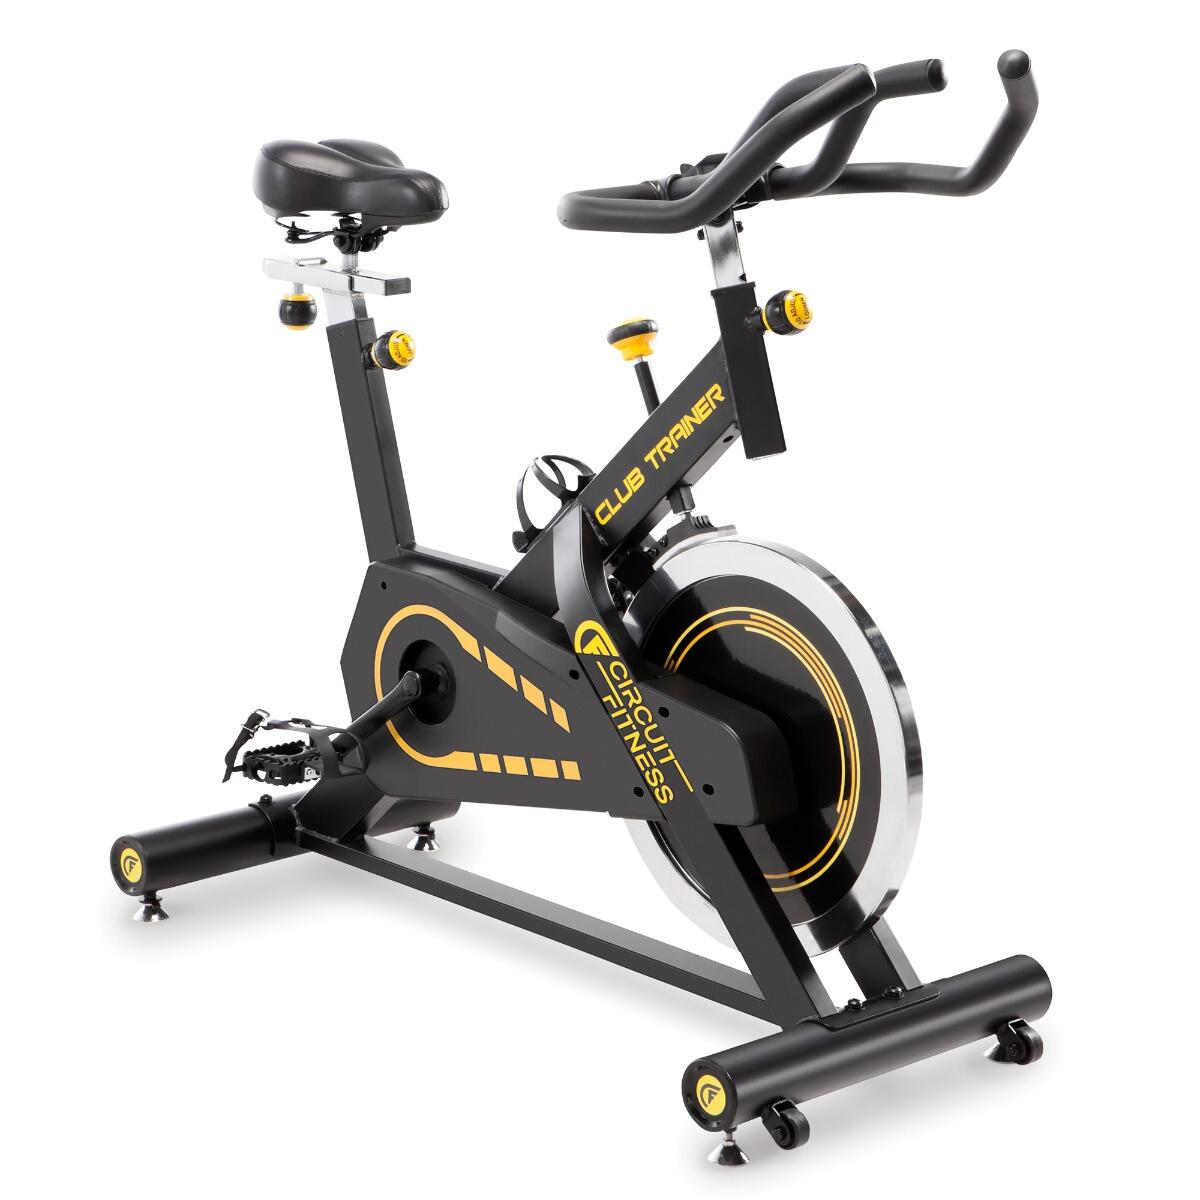 CIRCUIT FITNESS CIRCUIT FITNESS AMZ-955BK DELUXE CLUB REVOLUTION SPIN CYCLE YELLOW